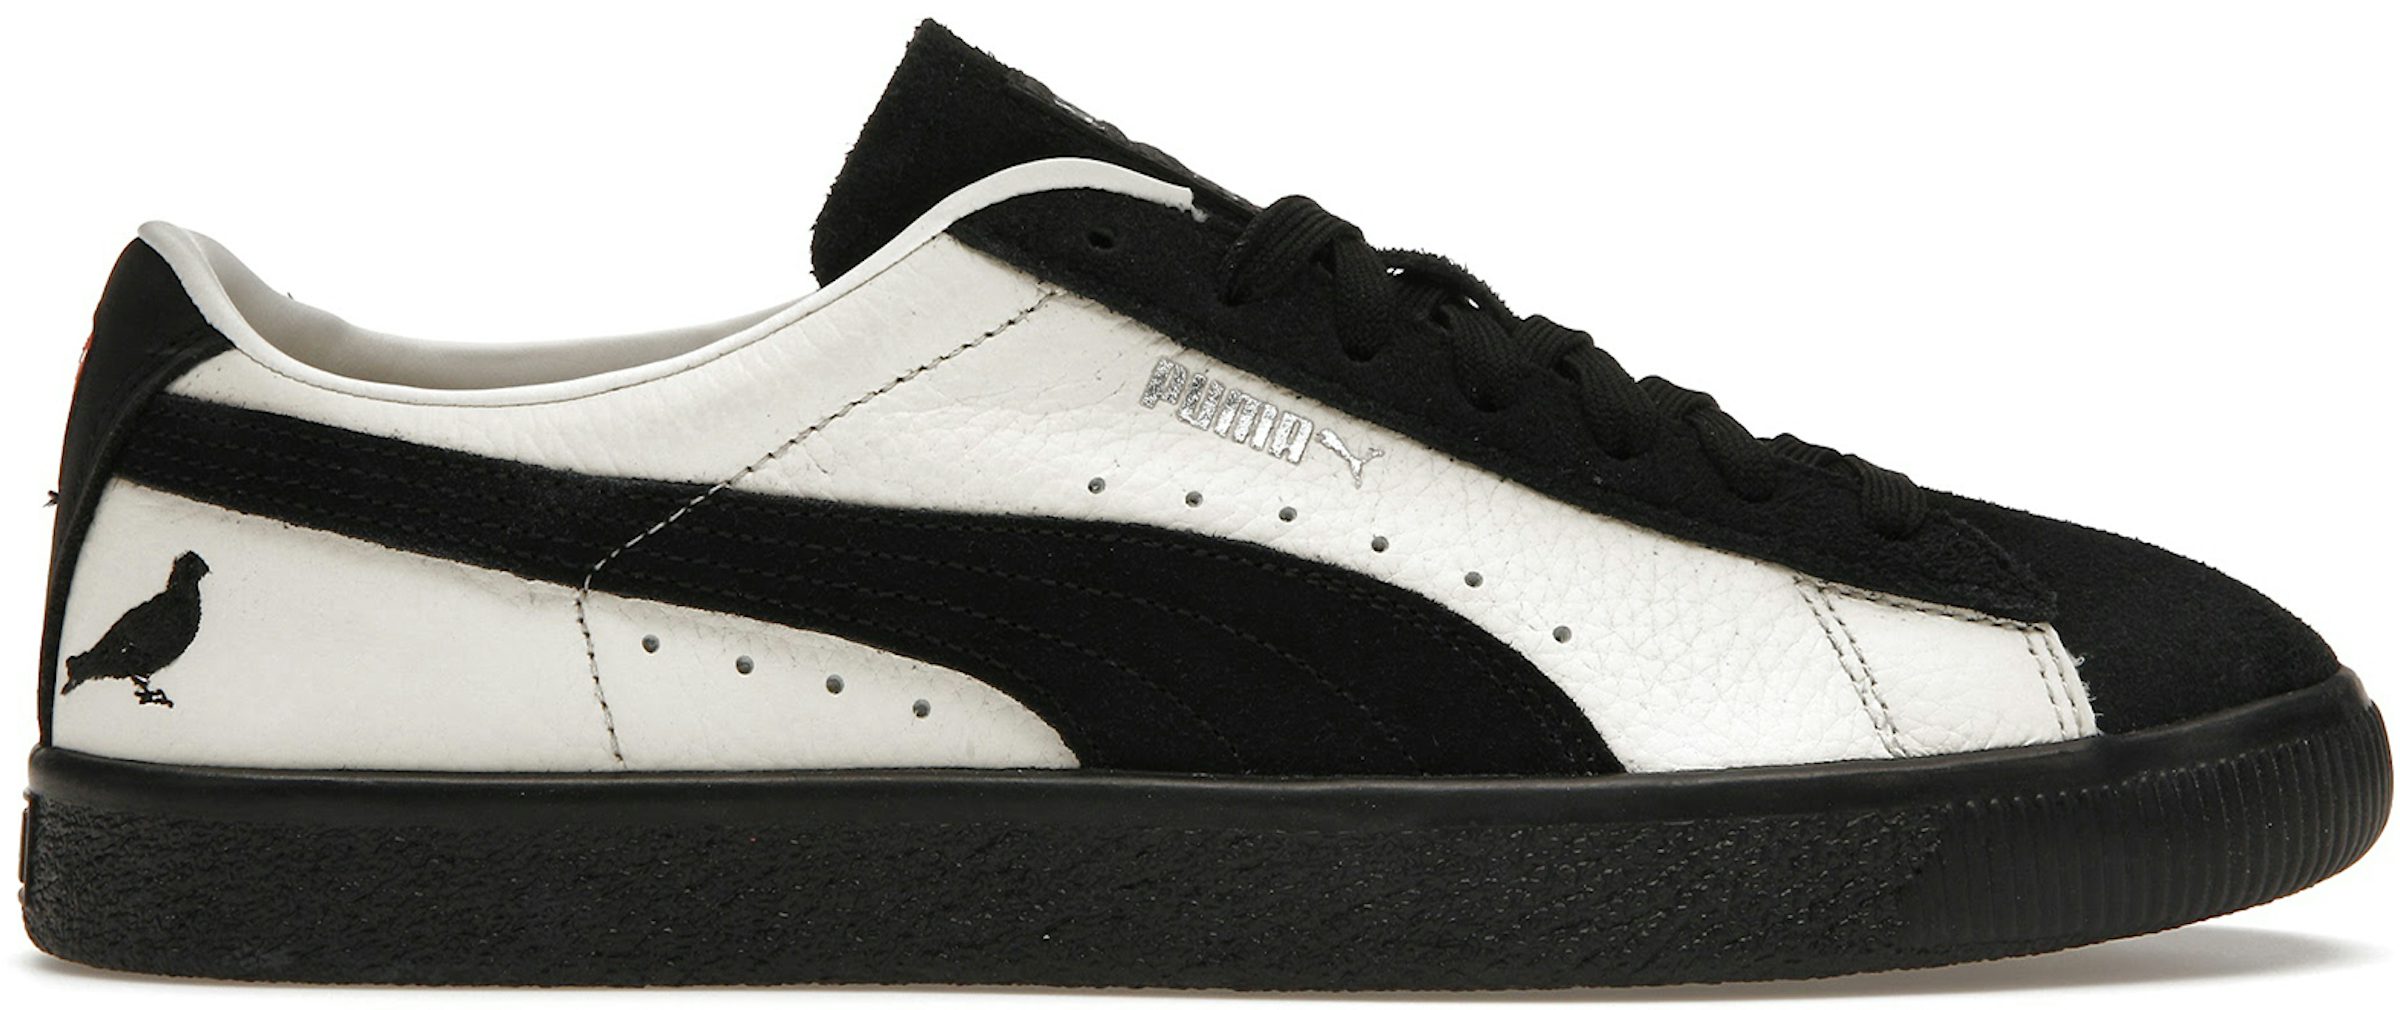 StockX Sneakers Buy New & Shoes Puma -